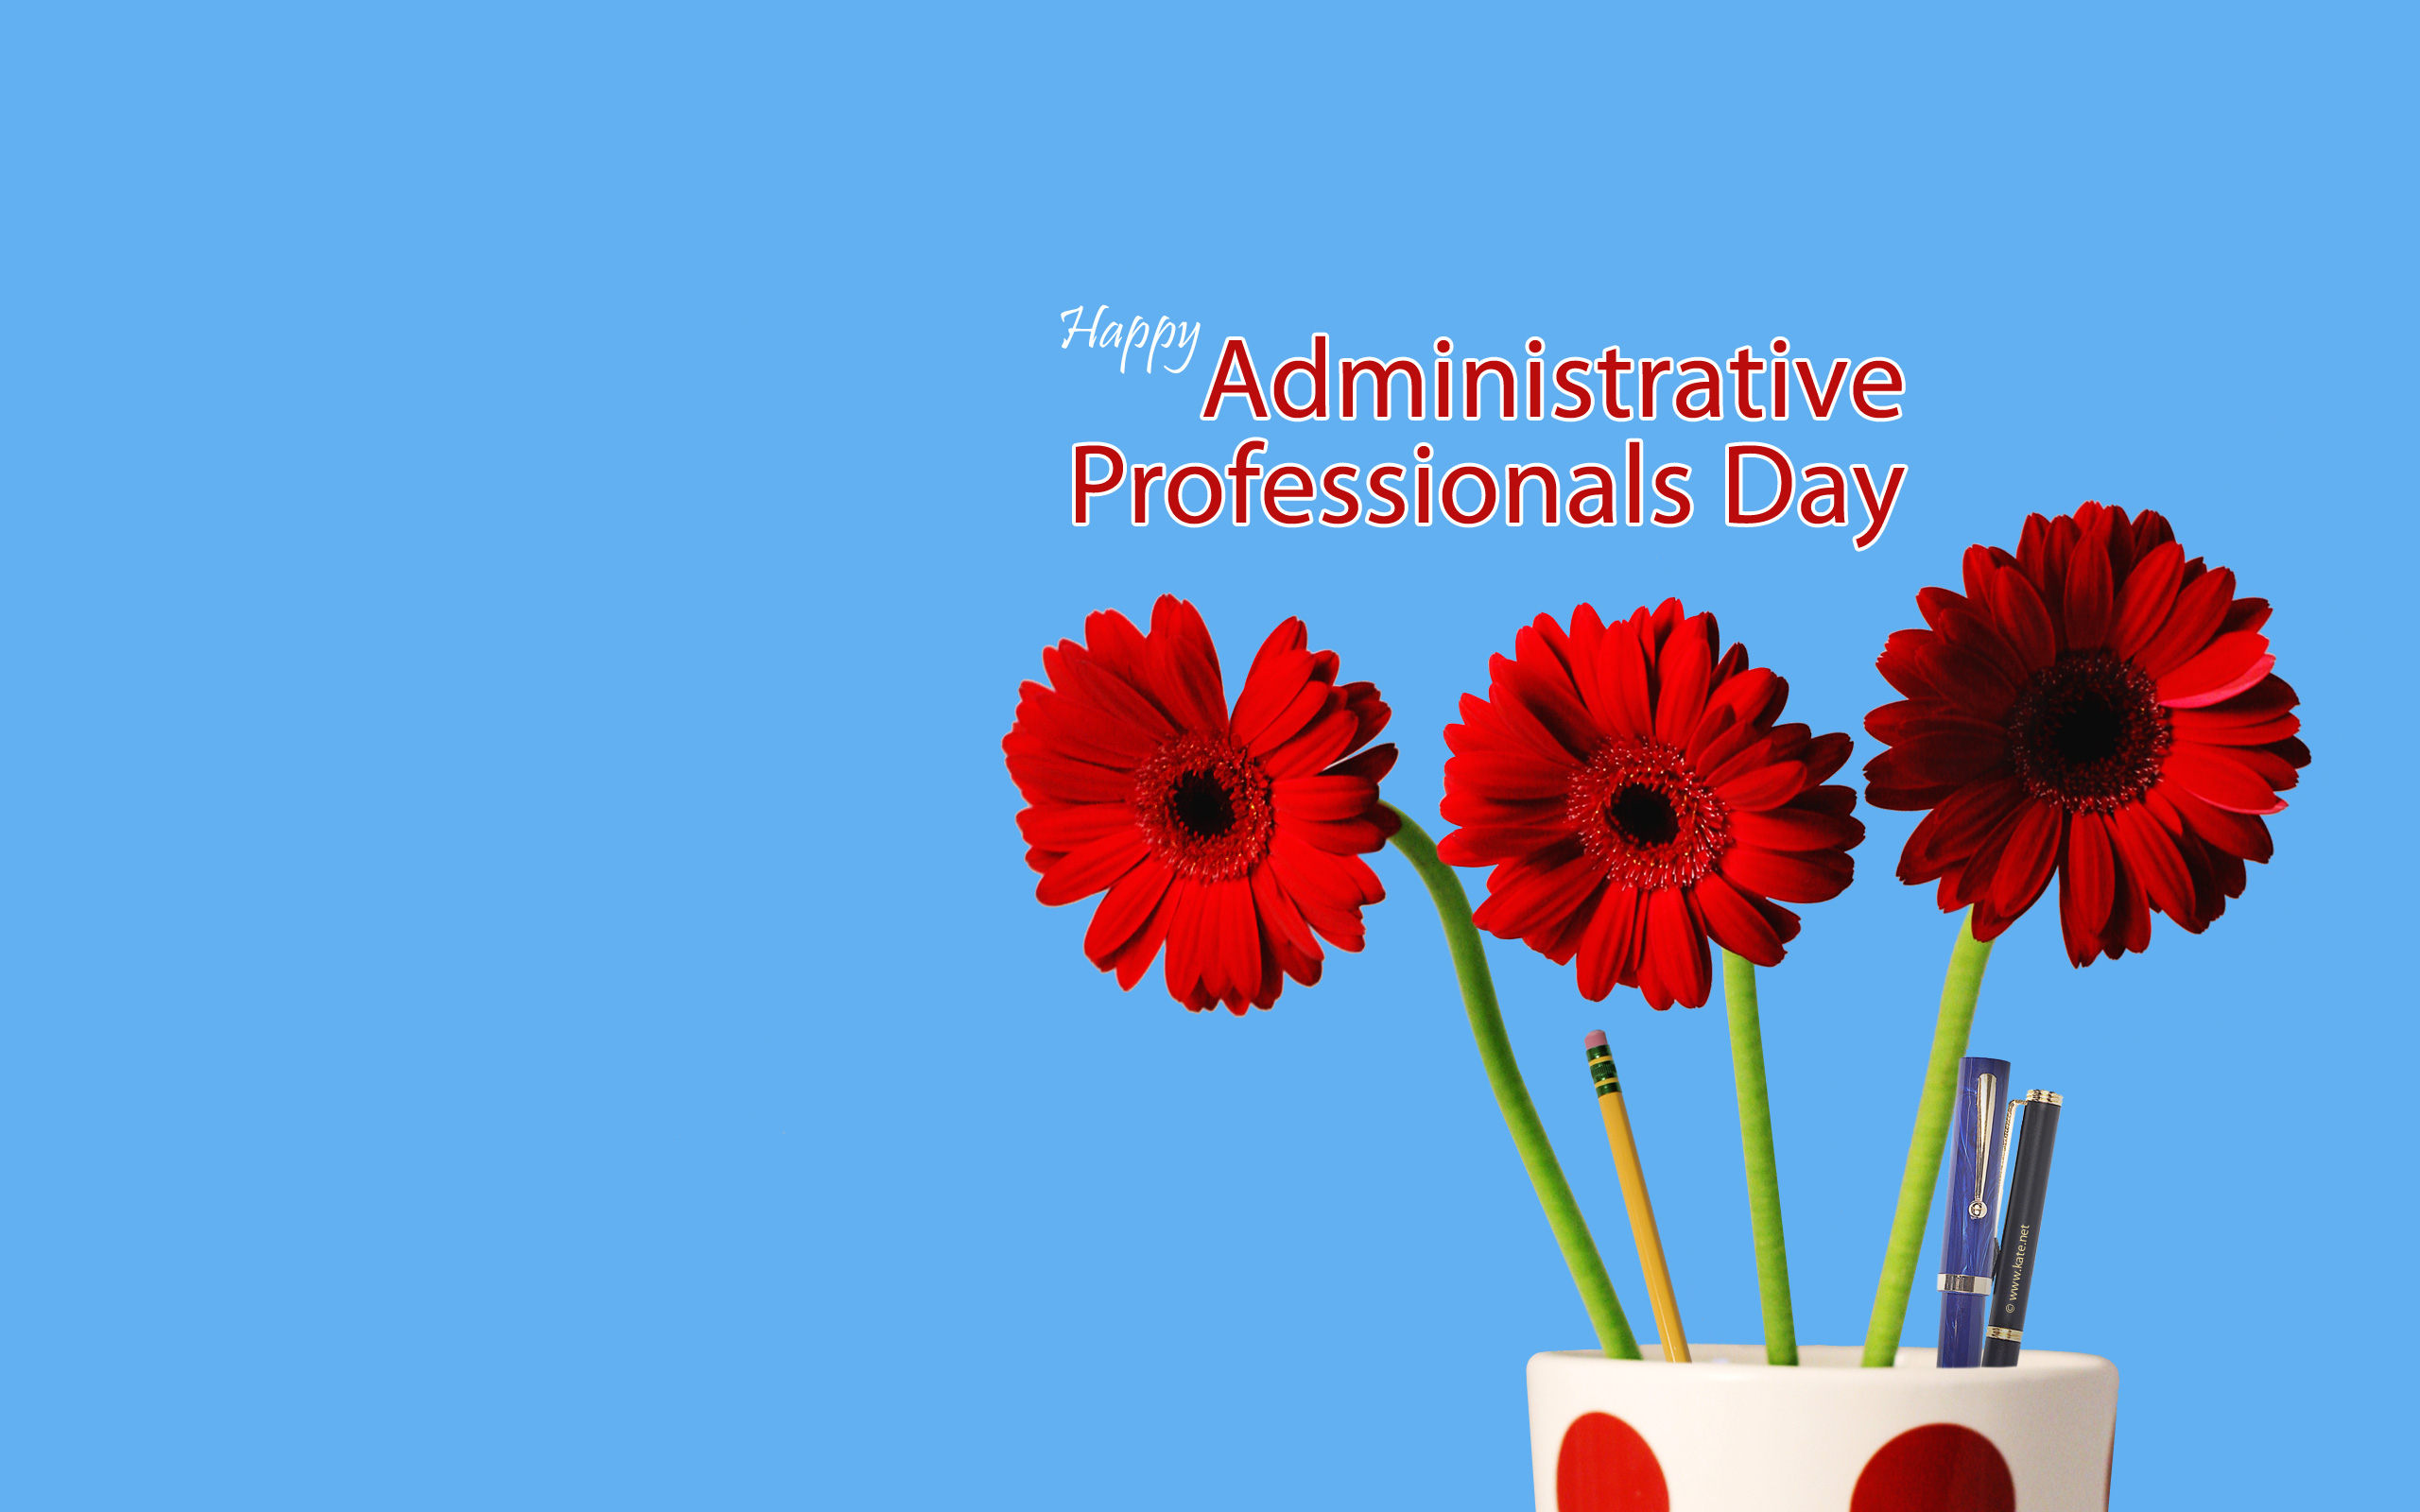 Administrative Professionals Day Wallpaperkate - Administrative Professionals Cards Printable Free